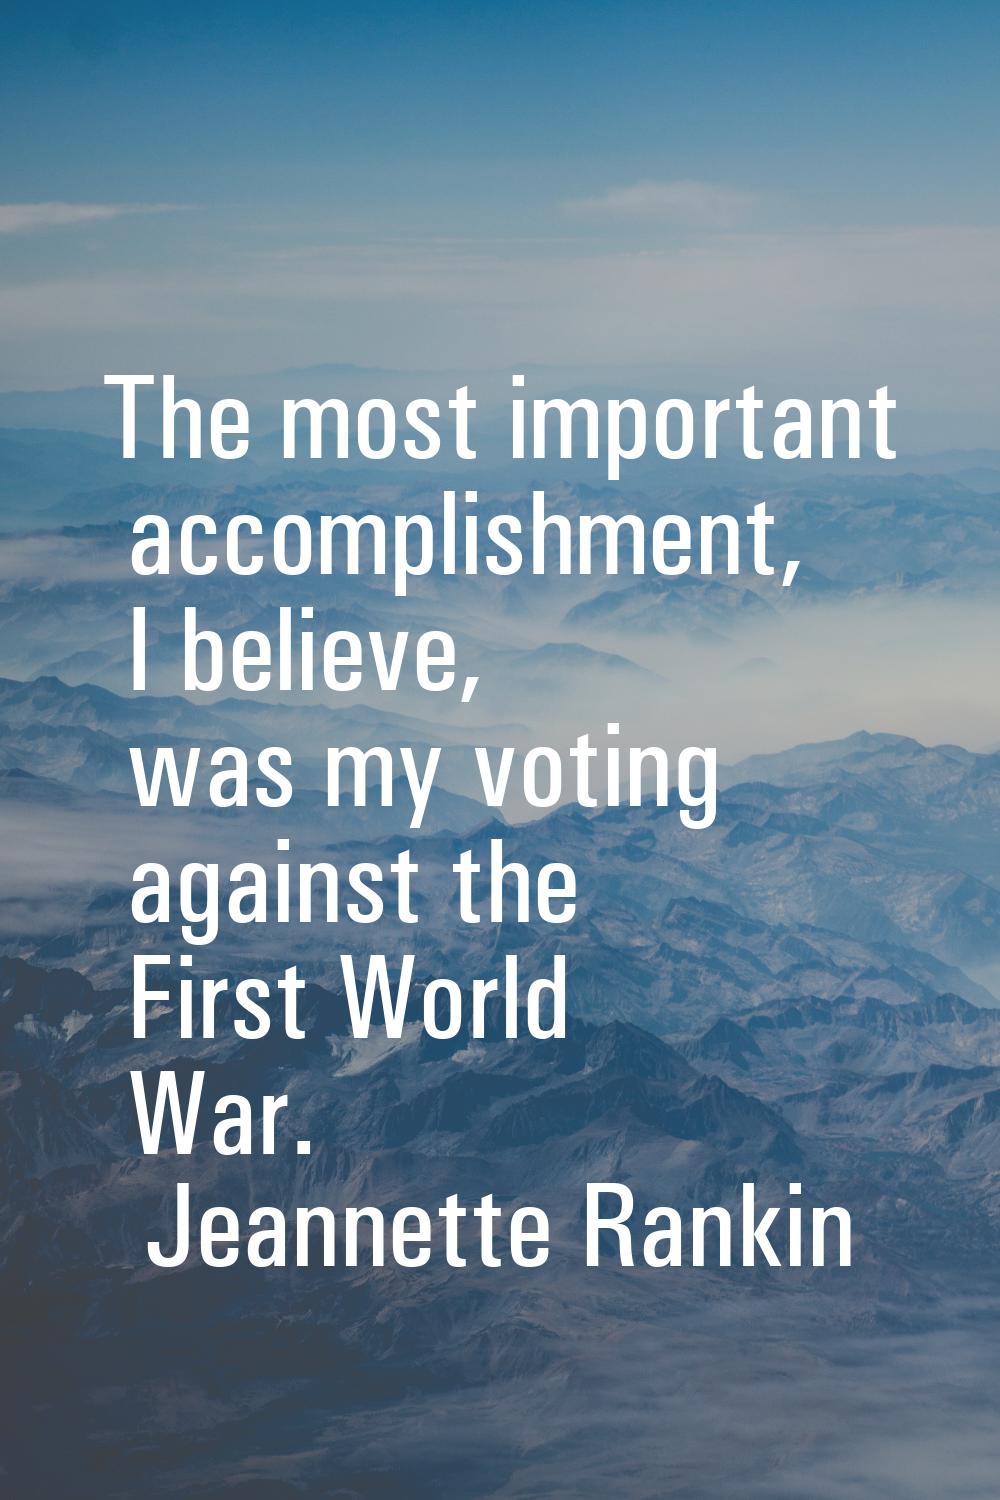 The most important accomplishment, I believe, was my voting against the First World War.